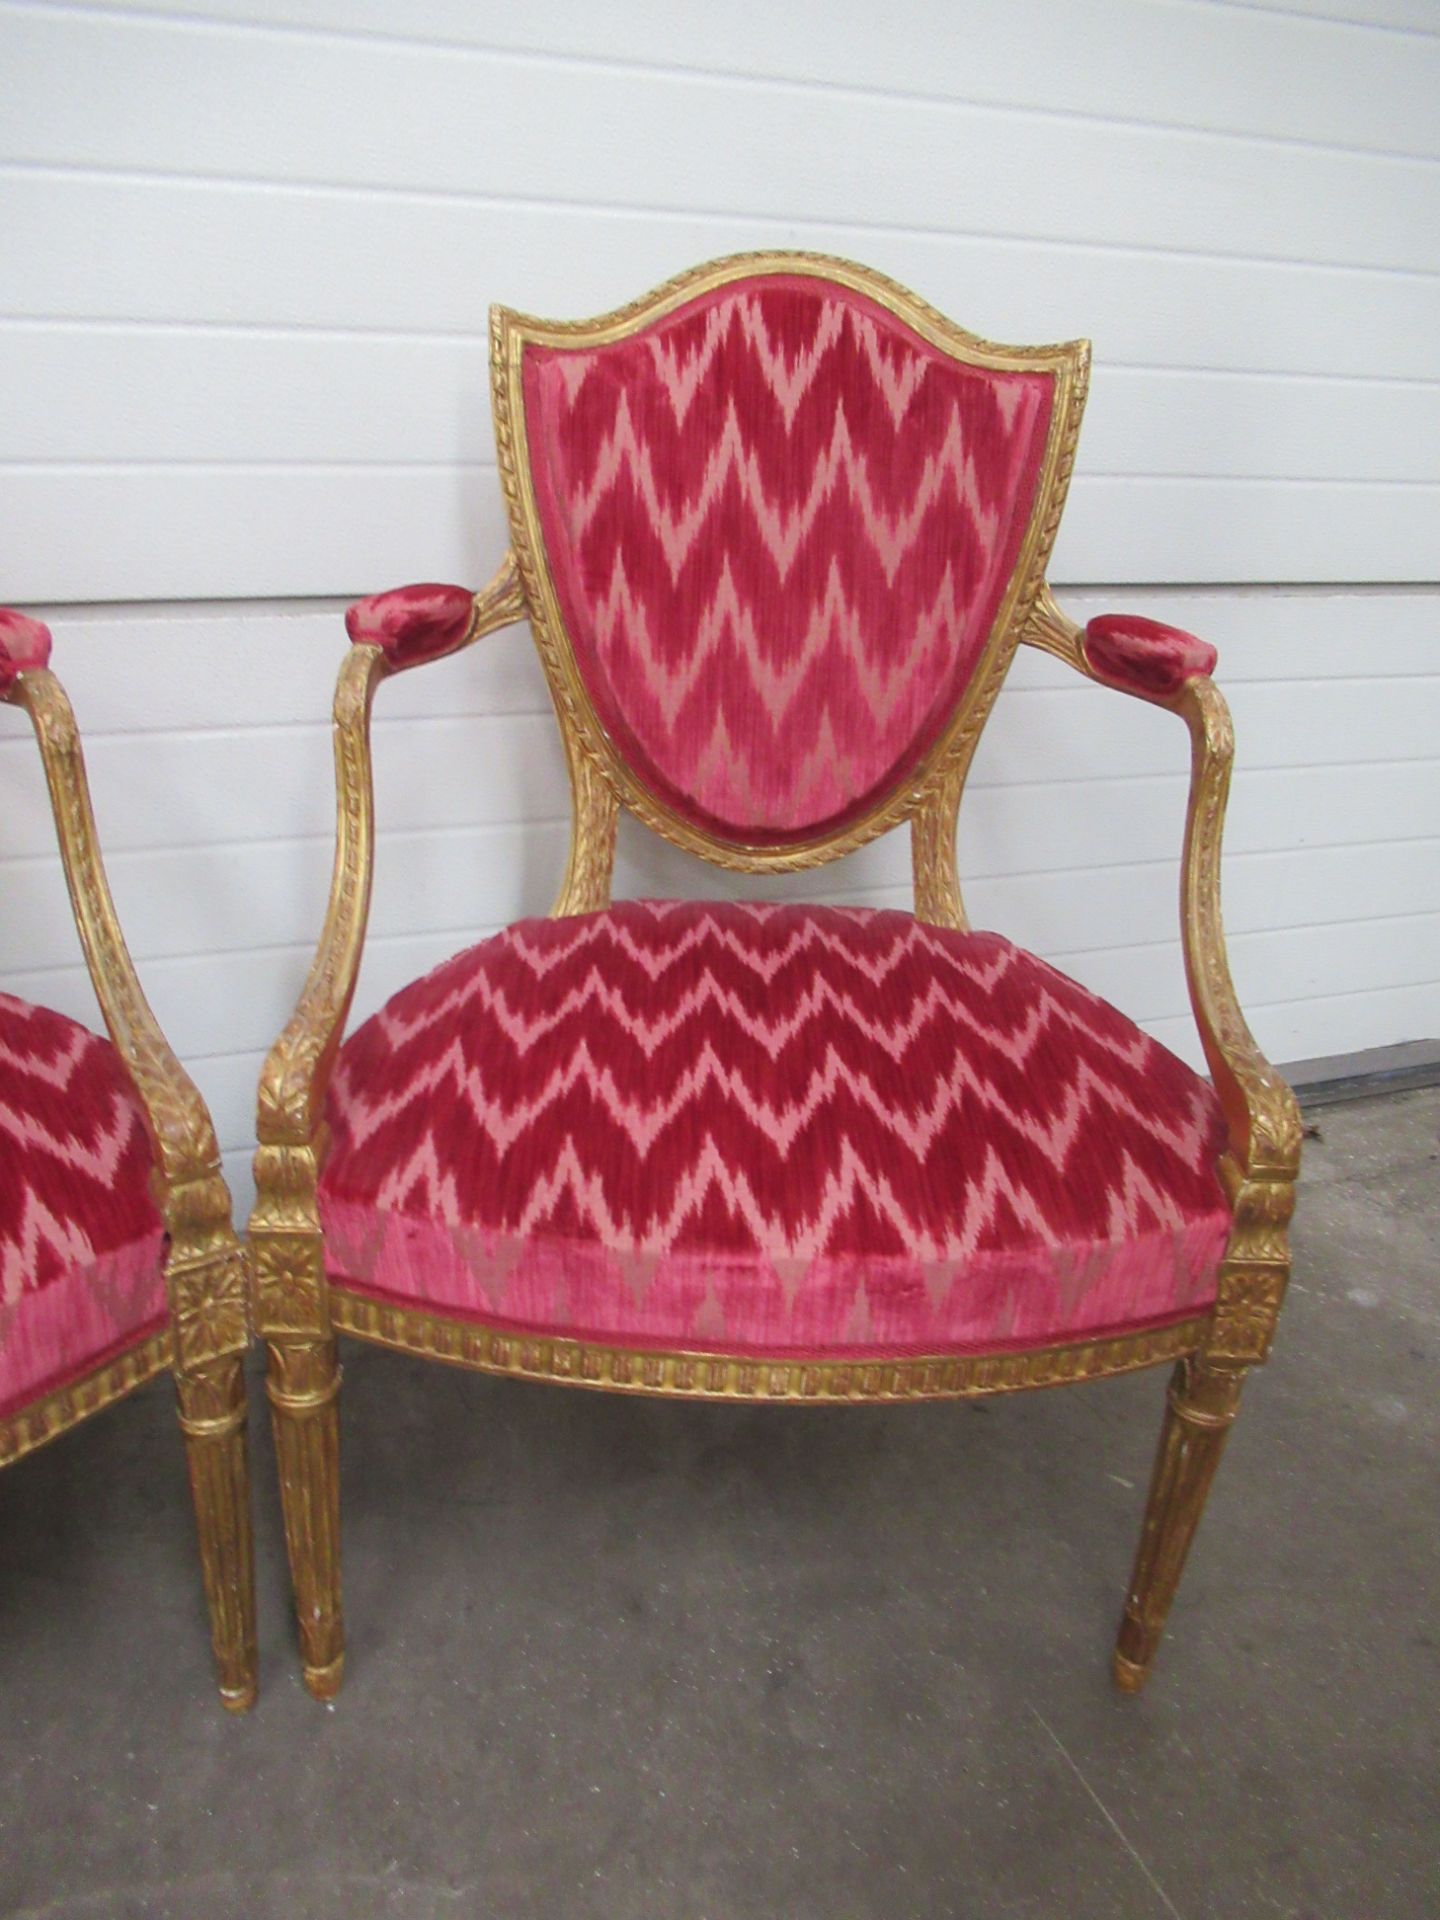 Pair of Gold and Pink Upholstered Salon Chairs - Image 2 of 3